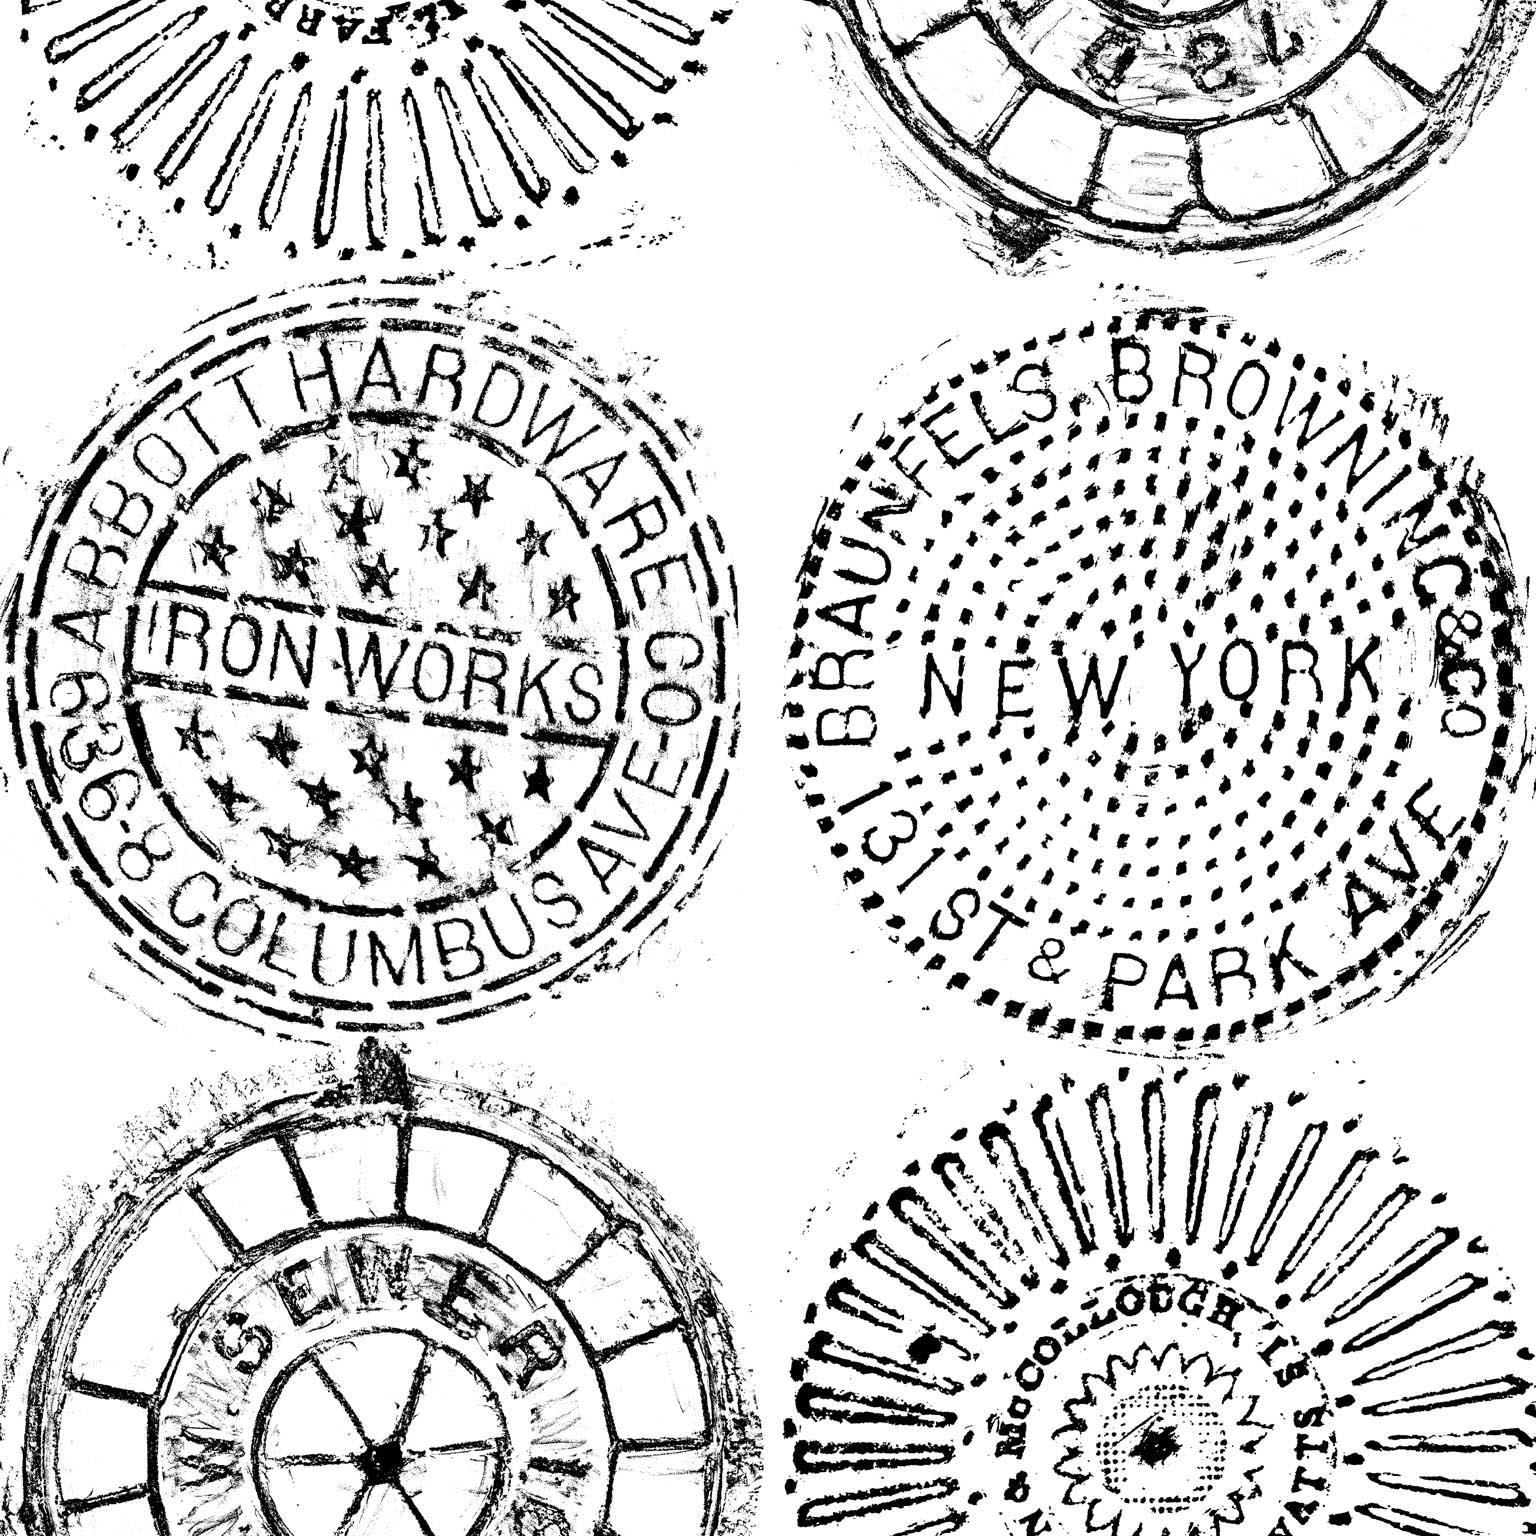 NYC Manhole Printed Wallpaper-Black on White Manhole Cover For Sale